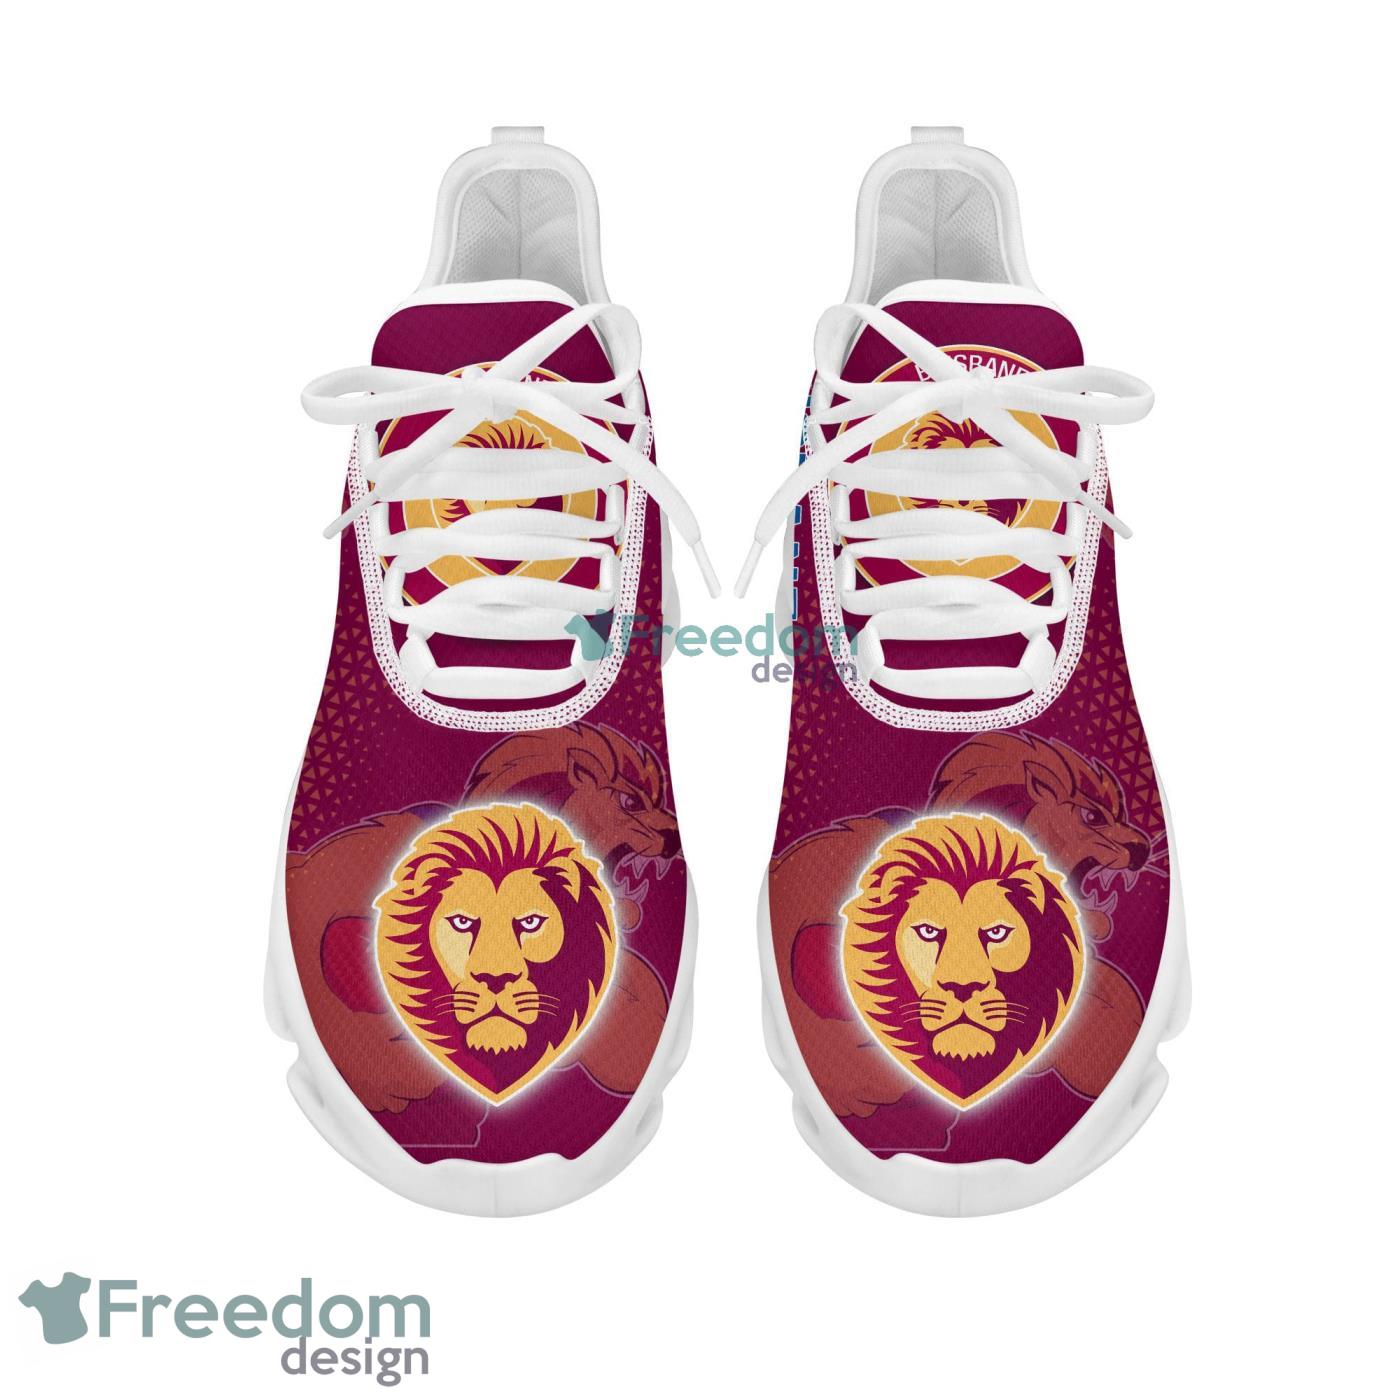 brisbane lions mascot running shoes max soul shoes afl sneakers for fans 1